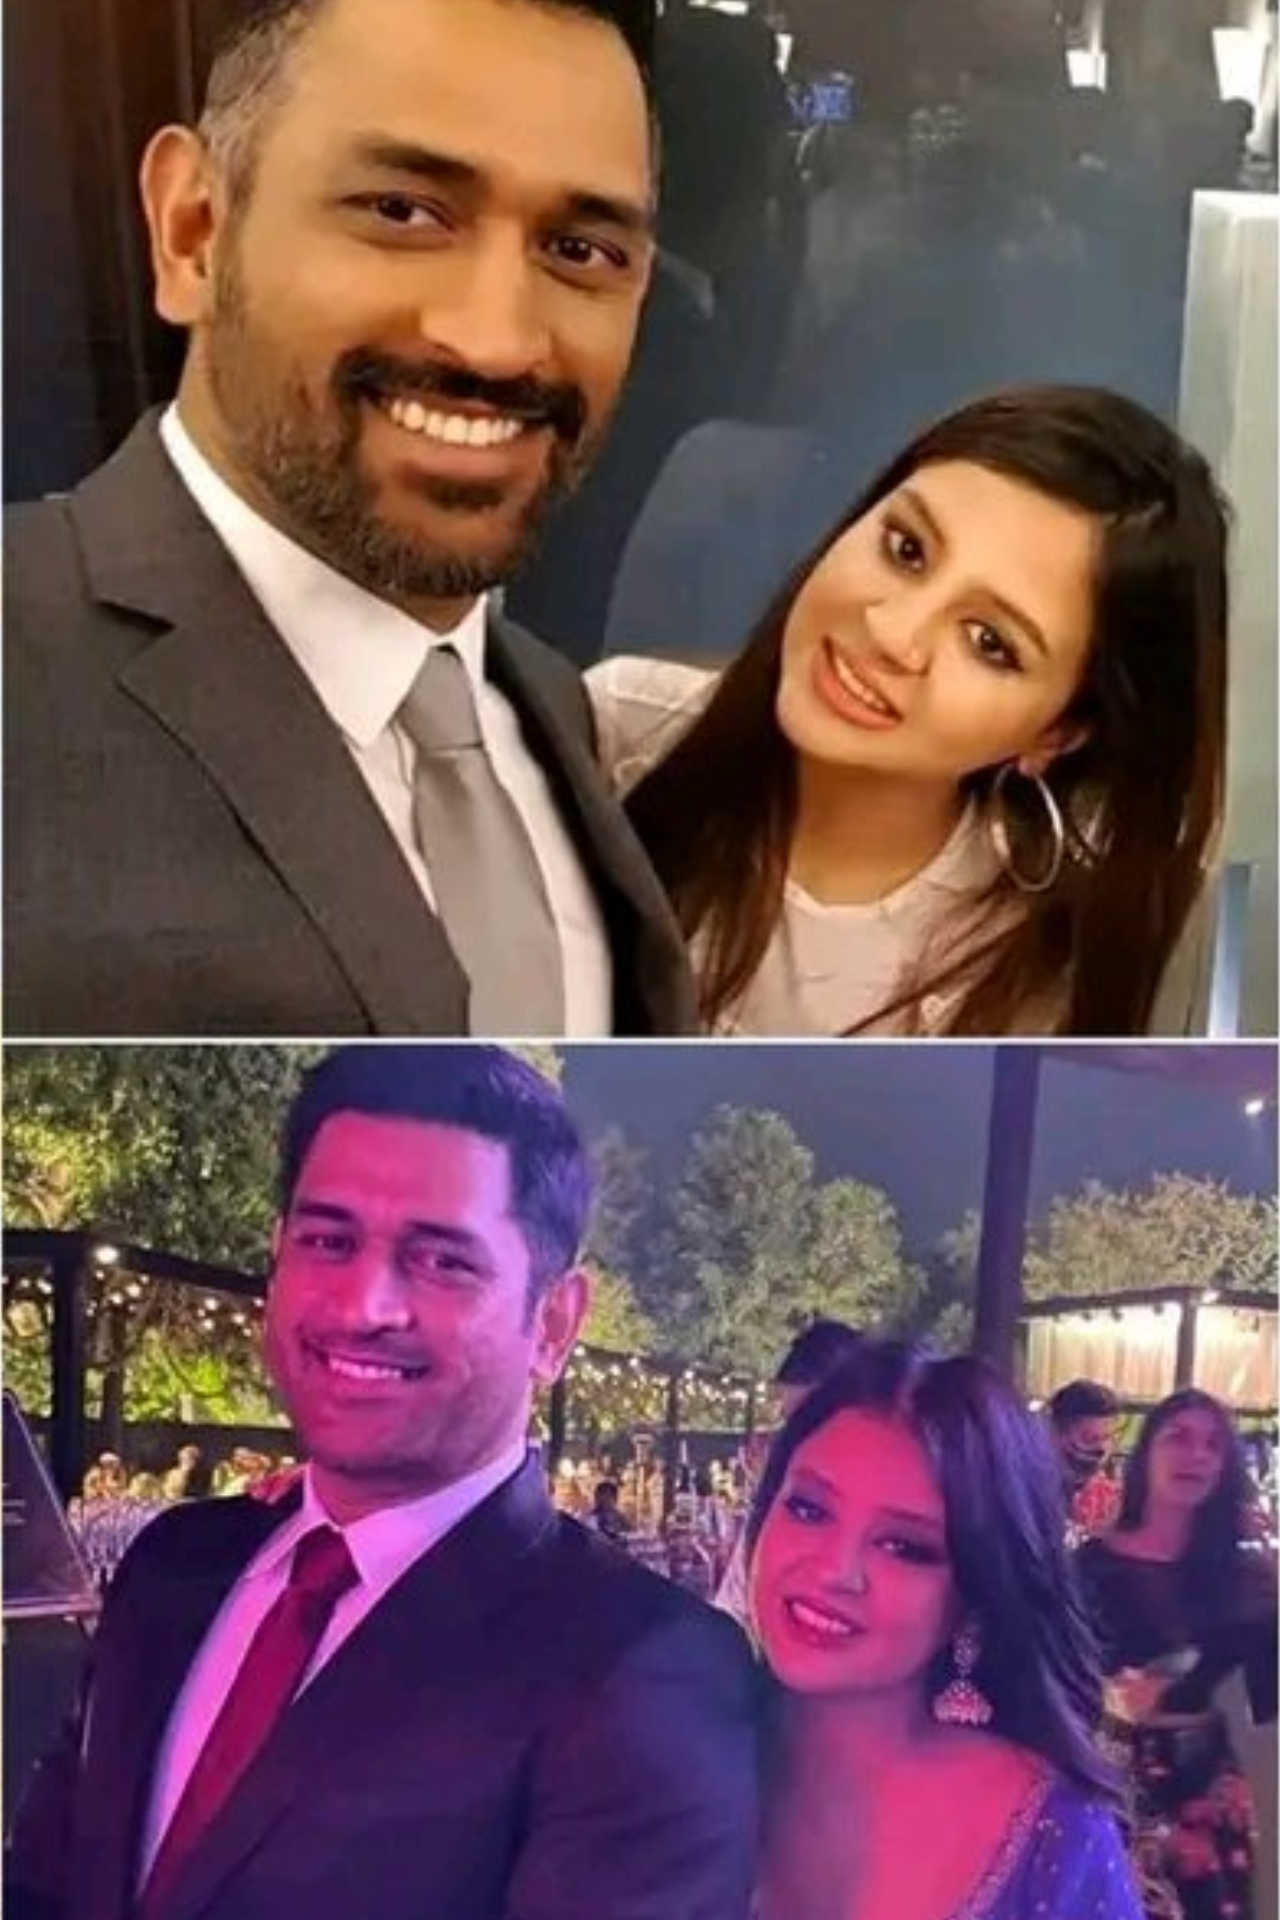 MS Dhoni and his wife Sakshi Dhoni have completed 12 years of marriage today.
&amp;nbsp;